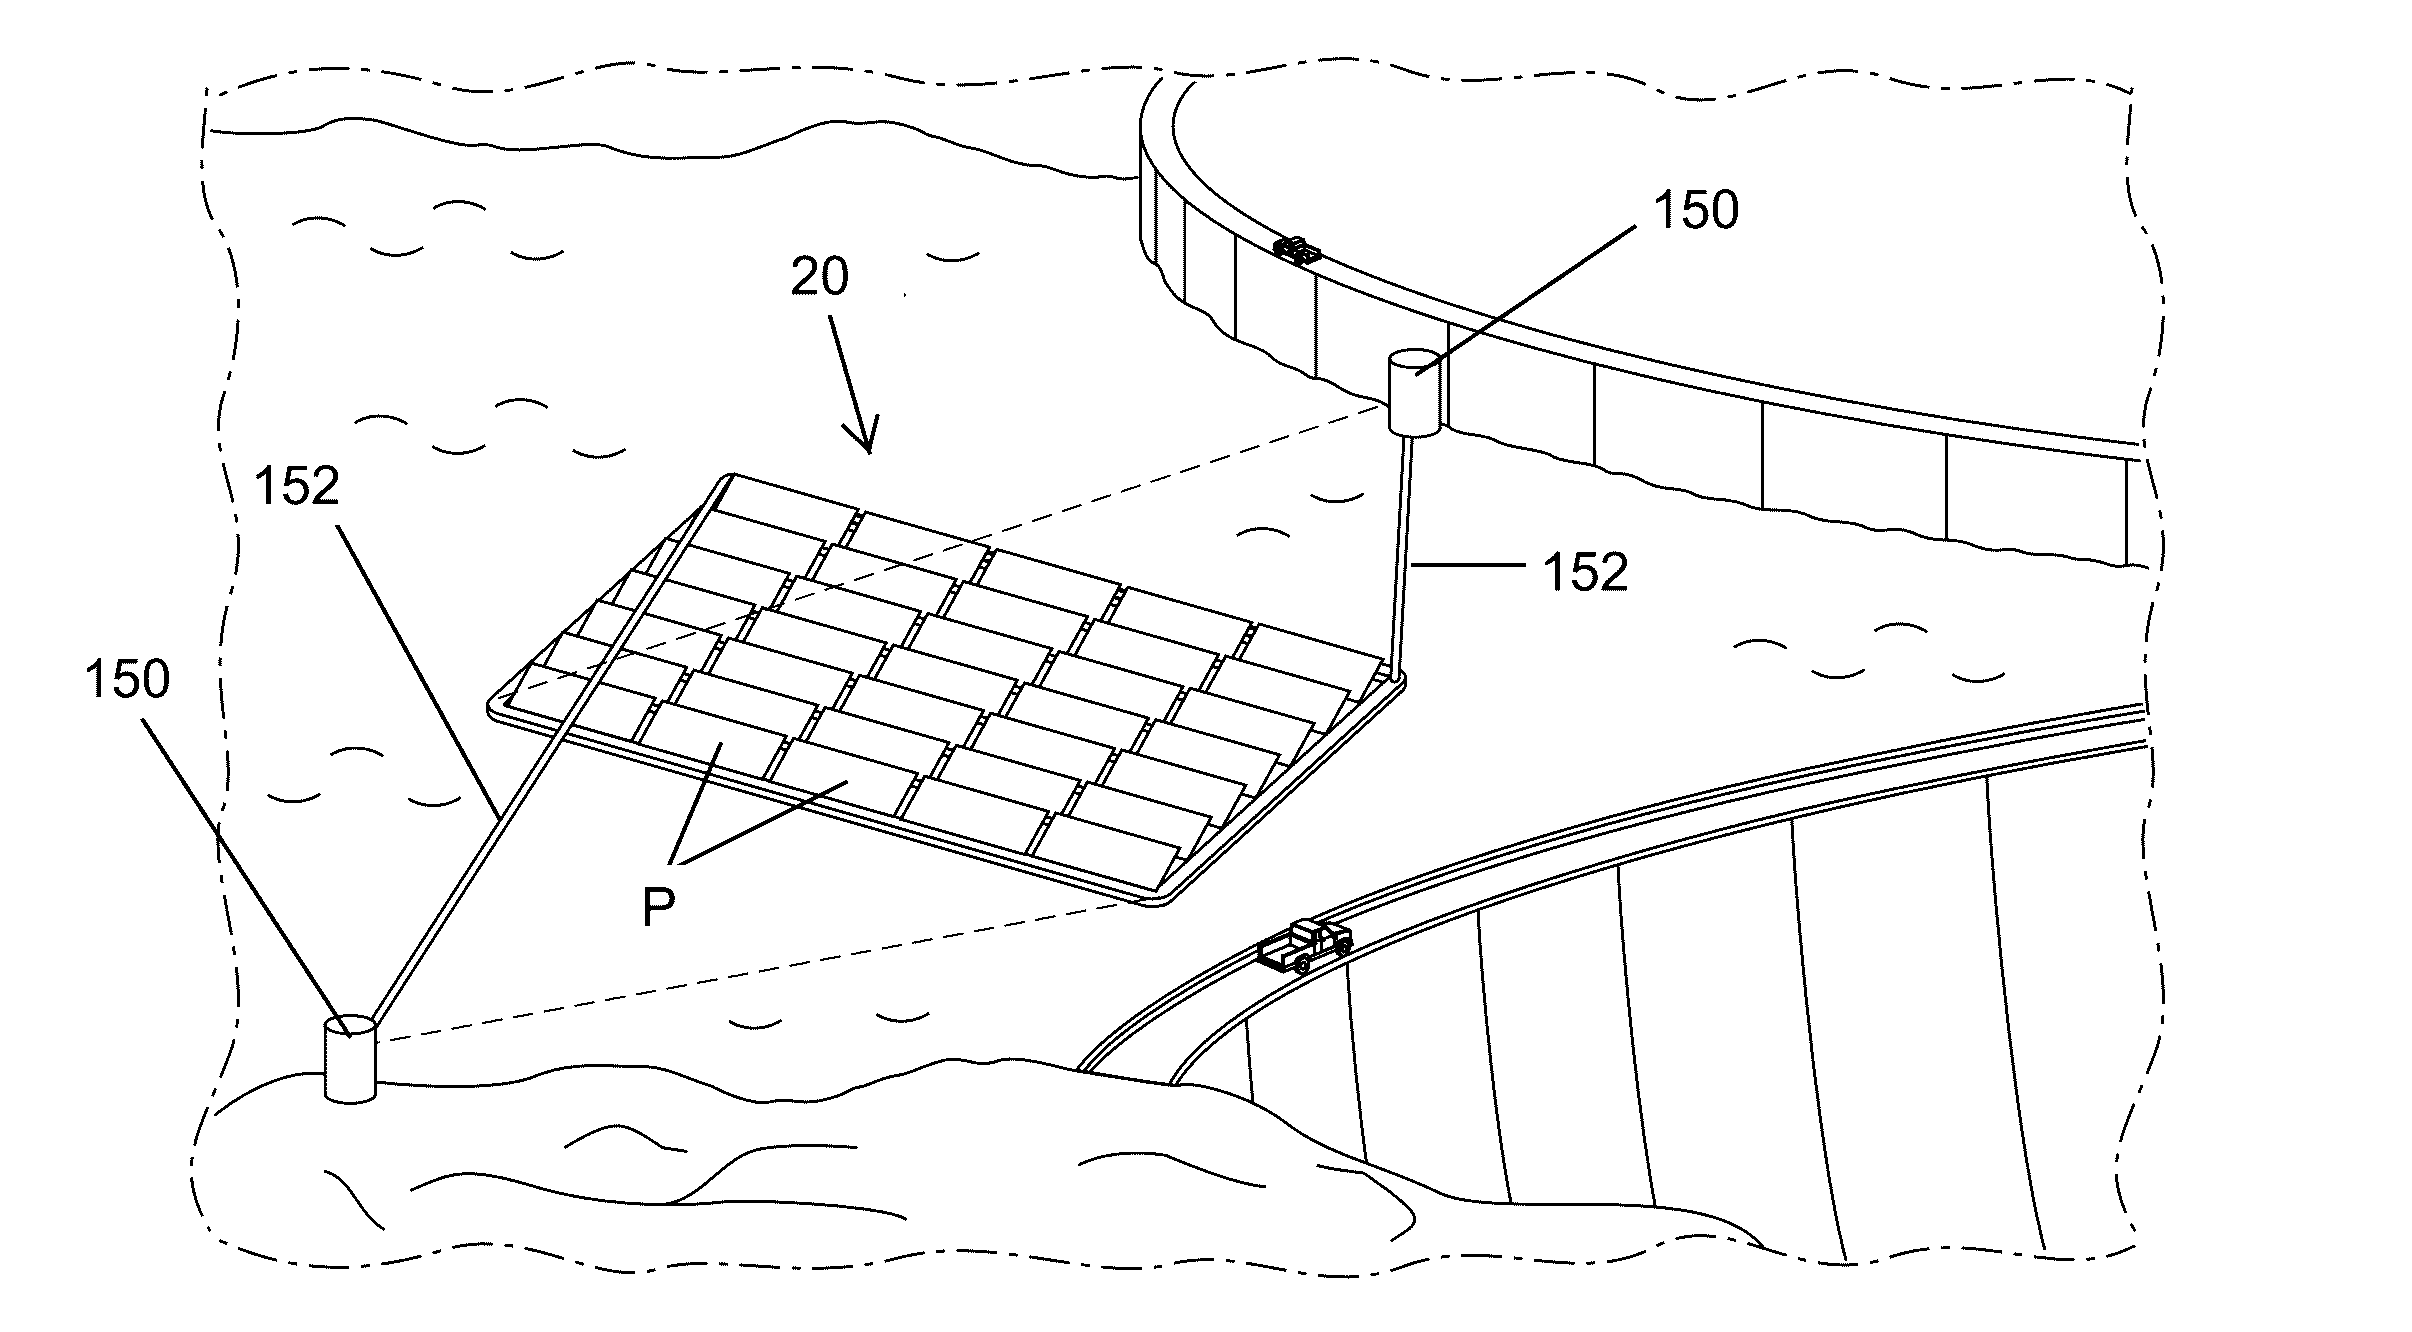 Floating solar panel array with one-axis tracking system